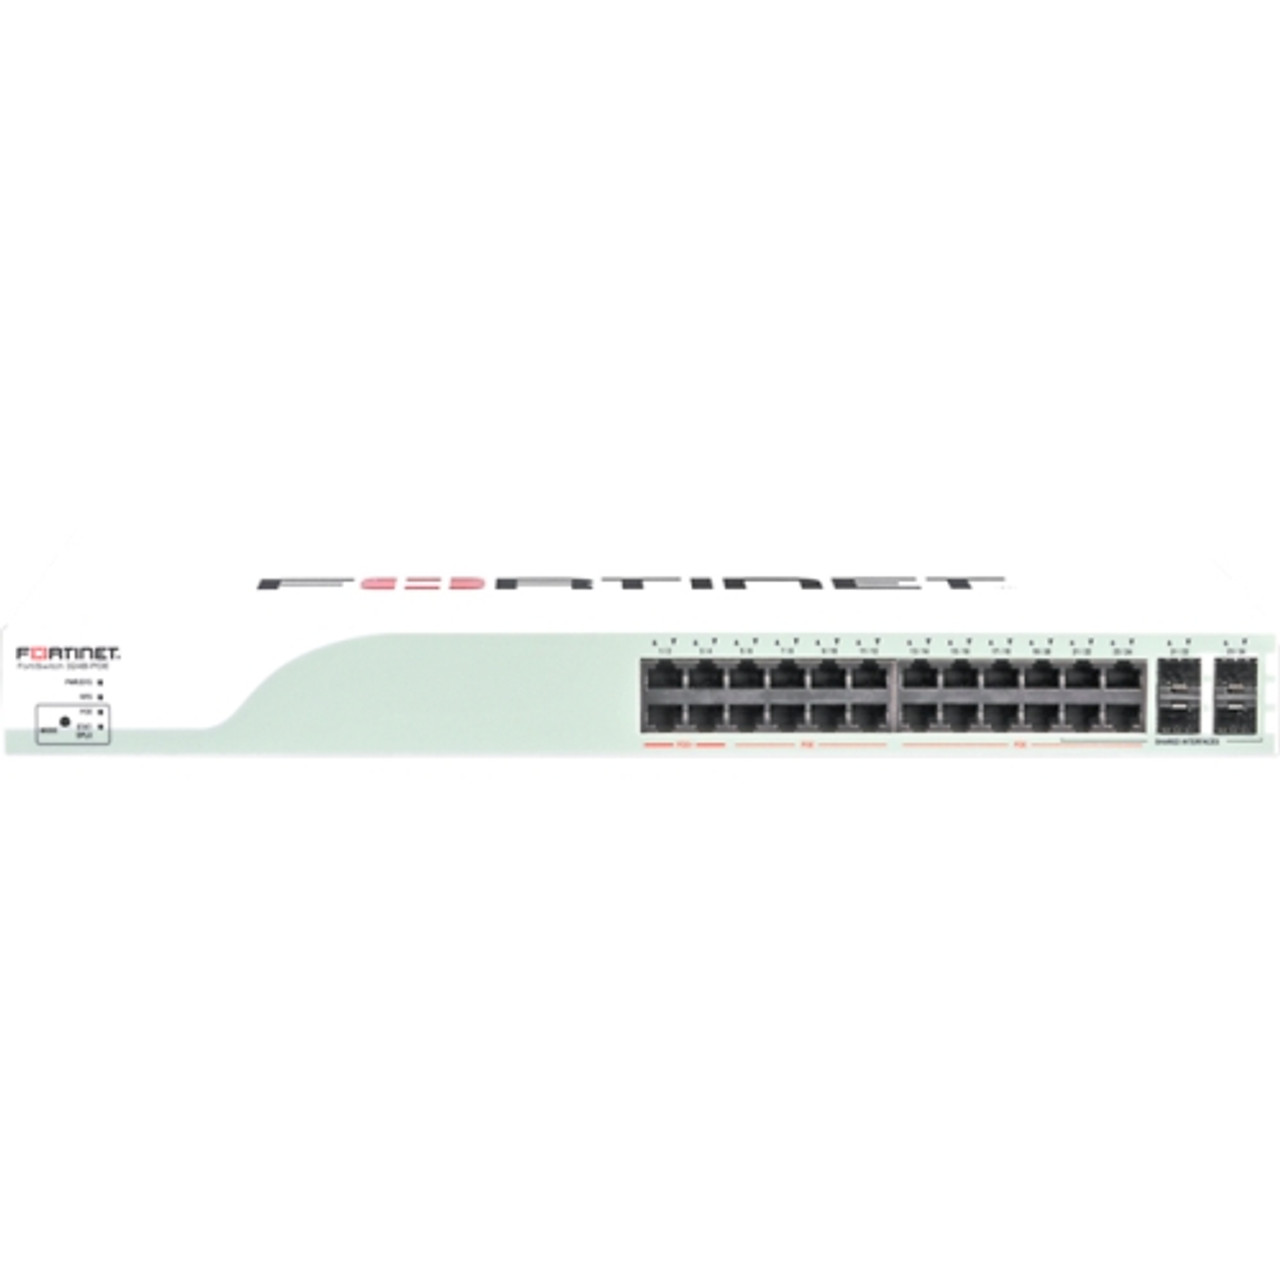 FS-324B-POE-G Fortinet FortiSwitch-324B-PoE Gigabit Ethernet Edge Switch Manageable 2 Layer Supported Rack-mountable (Refurbished)